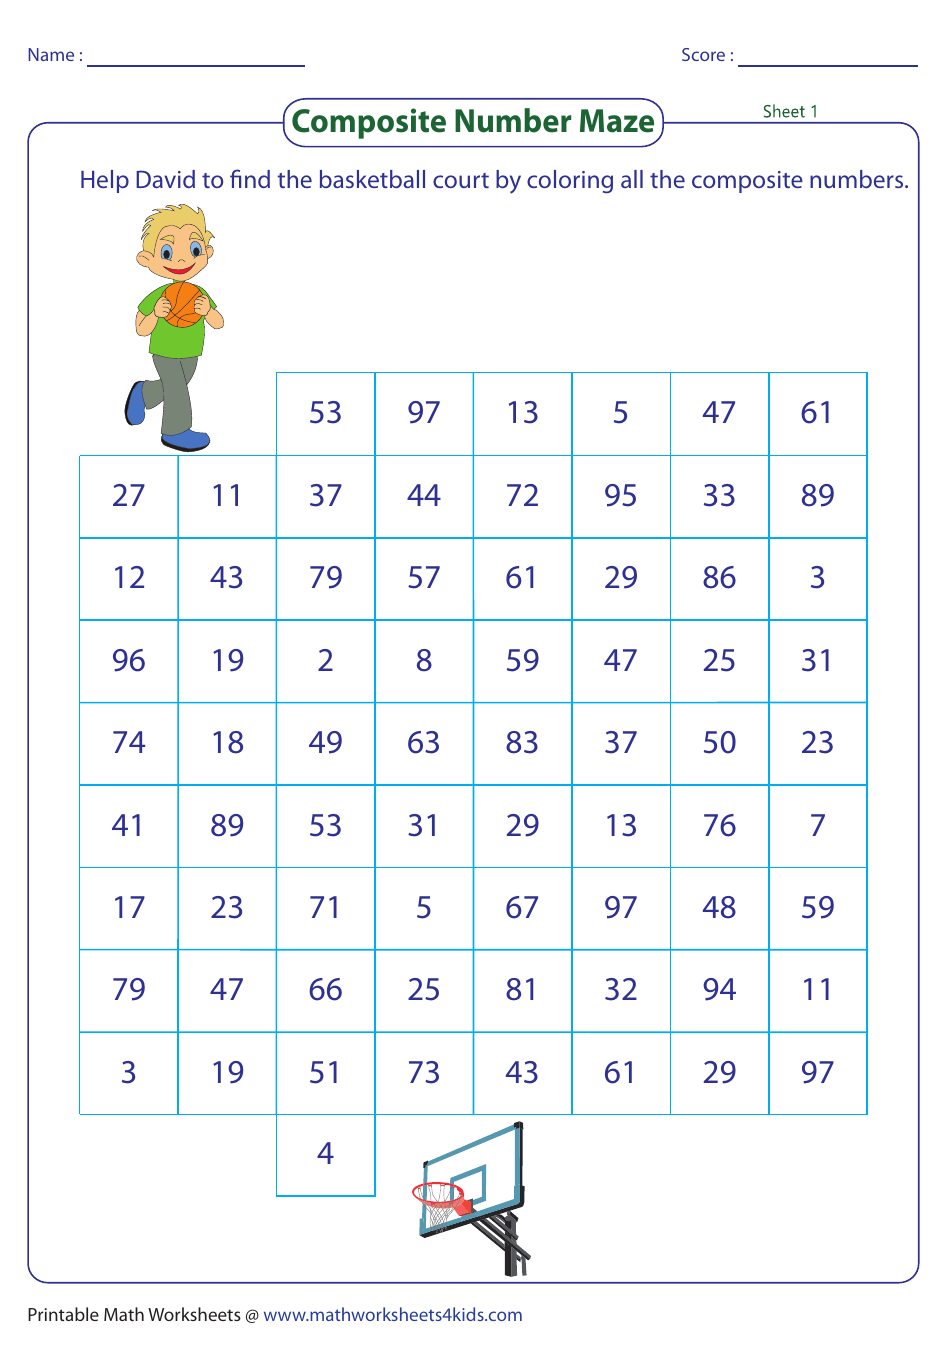 Composite Number Maze Worksheet With Answer Key Basketball Download Printable PDF Templateroller